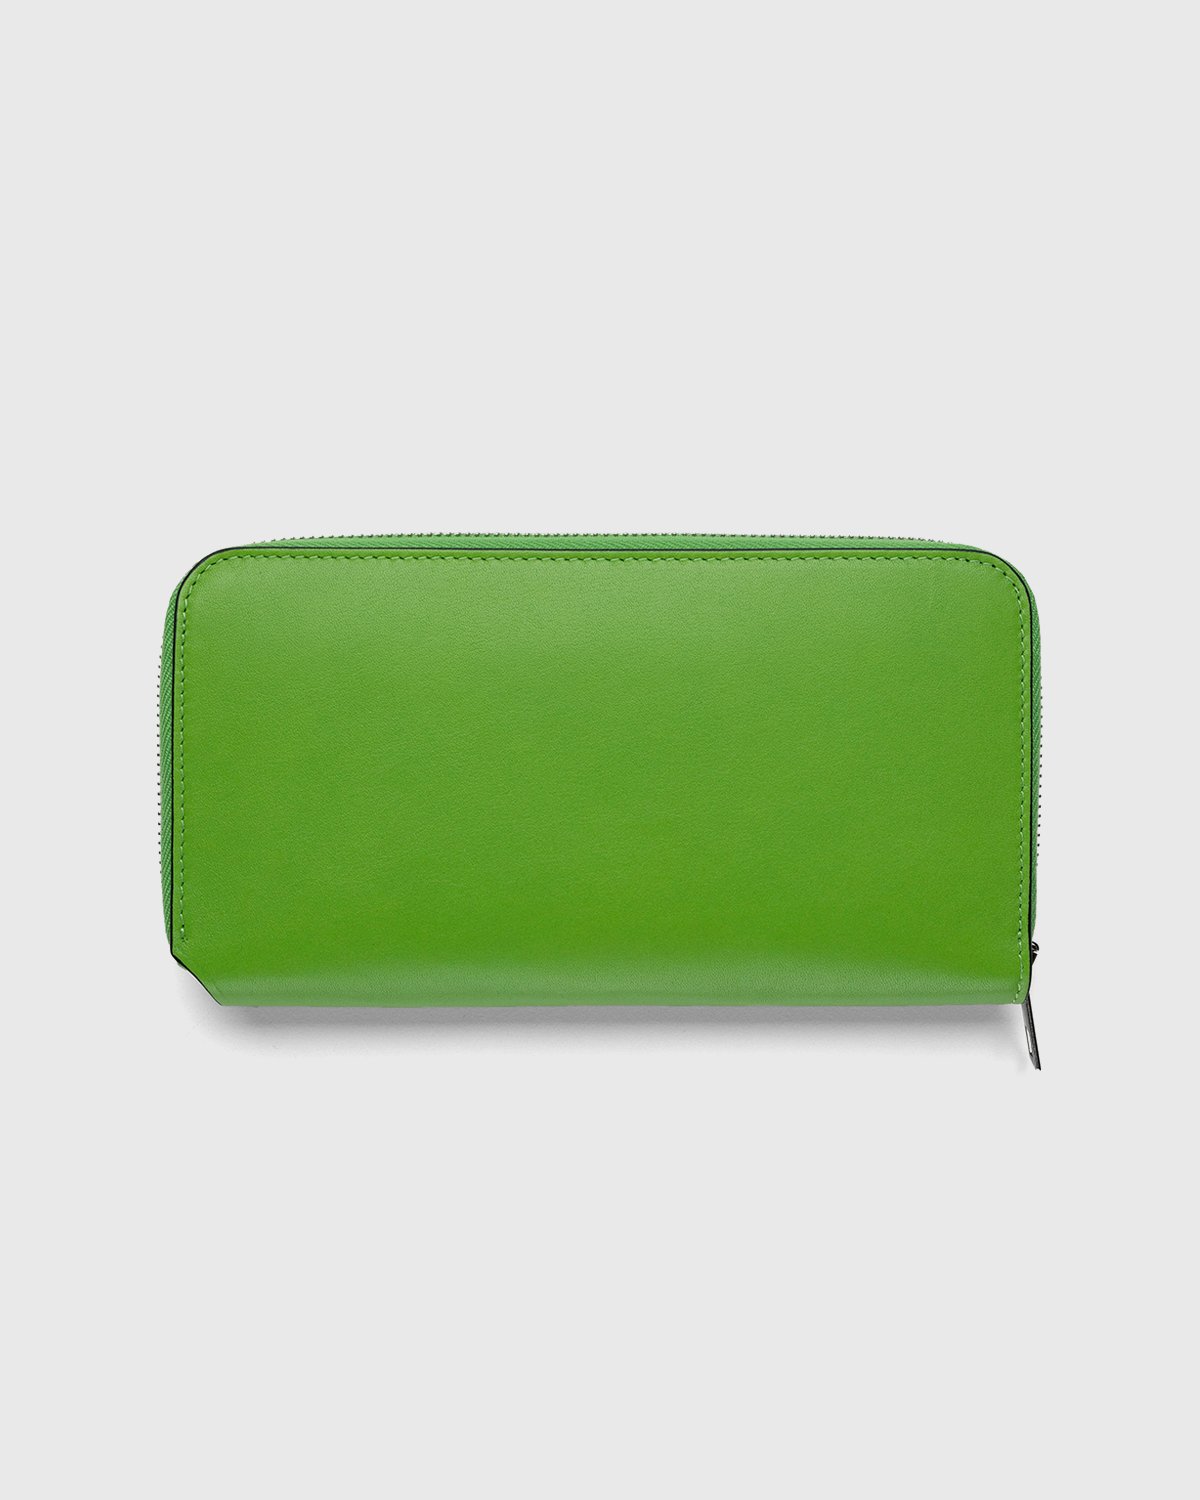 Acne Studios - Continental Wallet Multi Green - Accessories - Green - Image 2